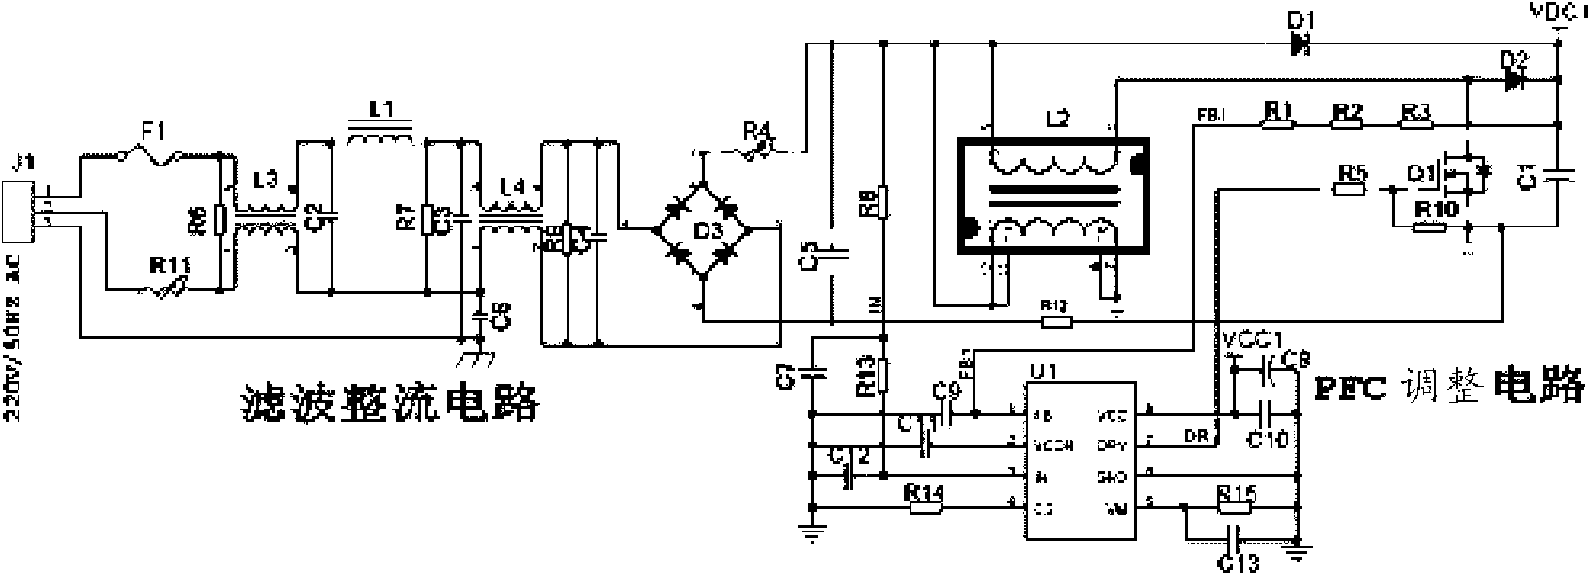 Power supply topology system of LED (Light-Emitting Diode) display module